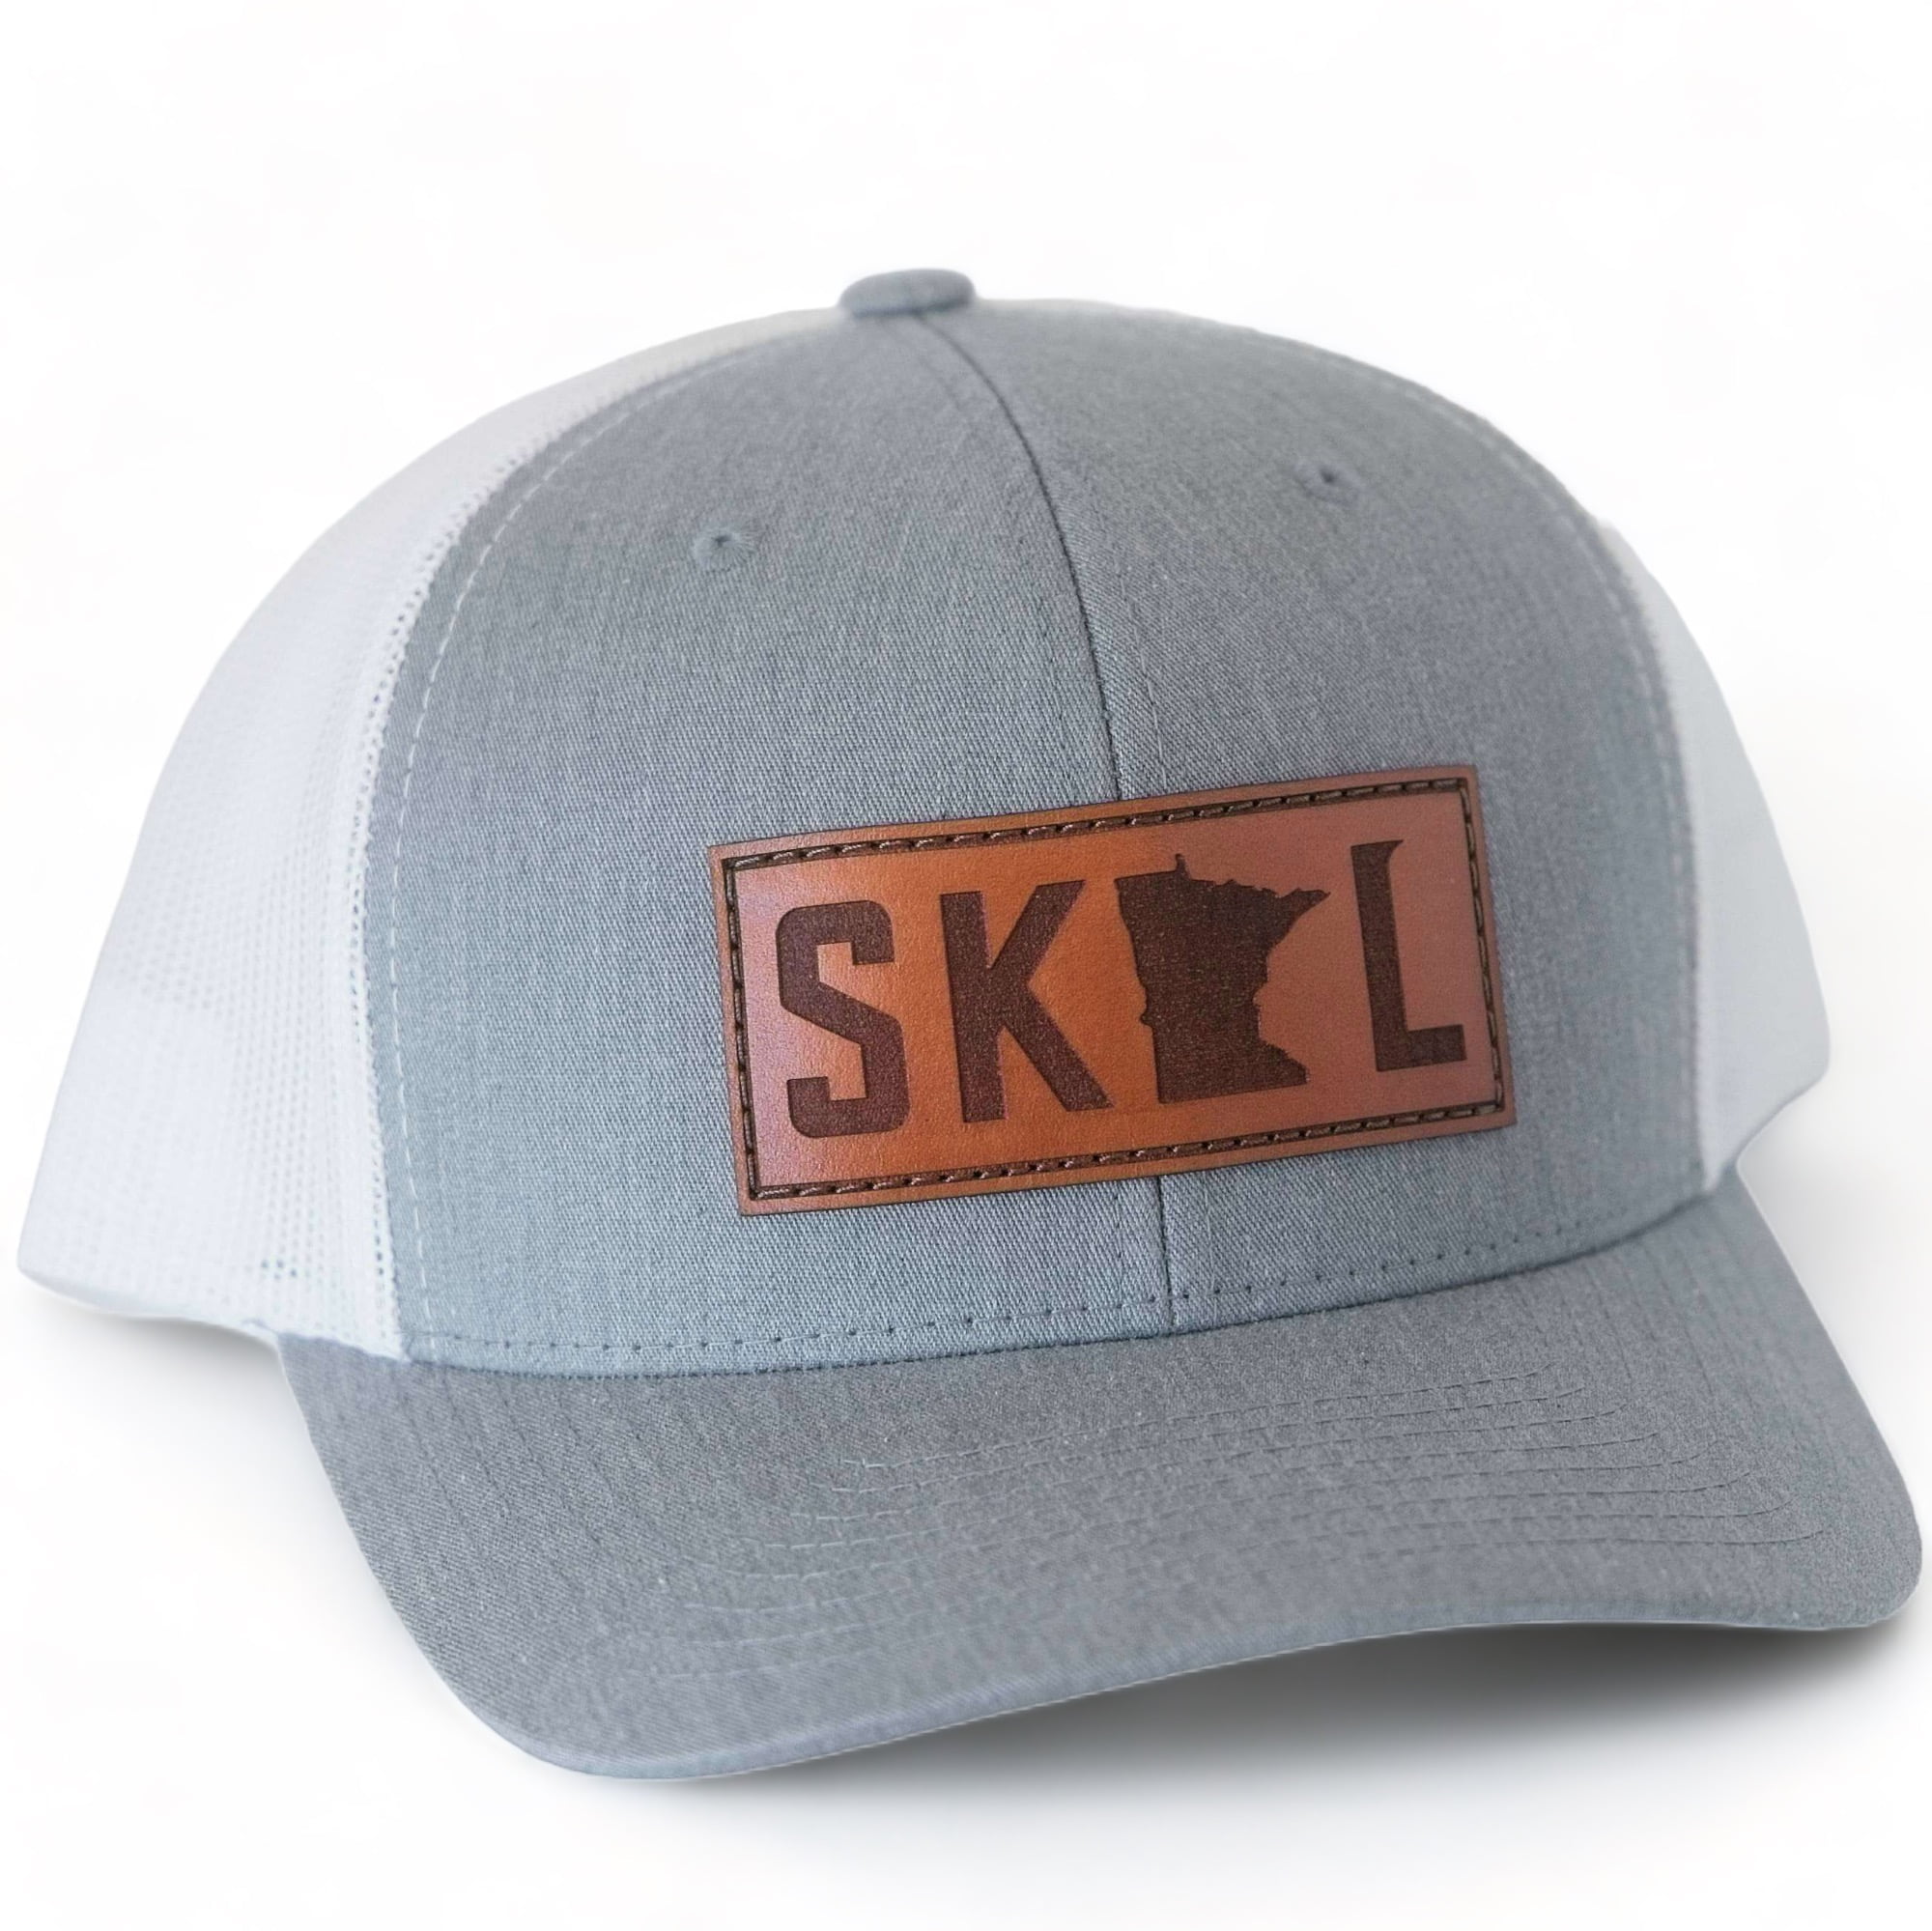 Skol Leather Patch Hat